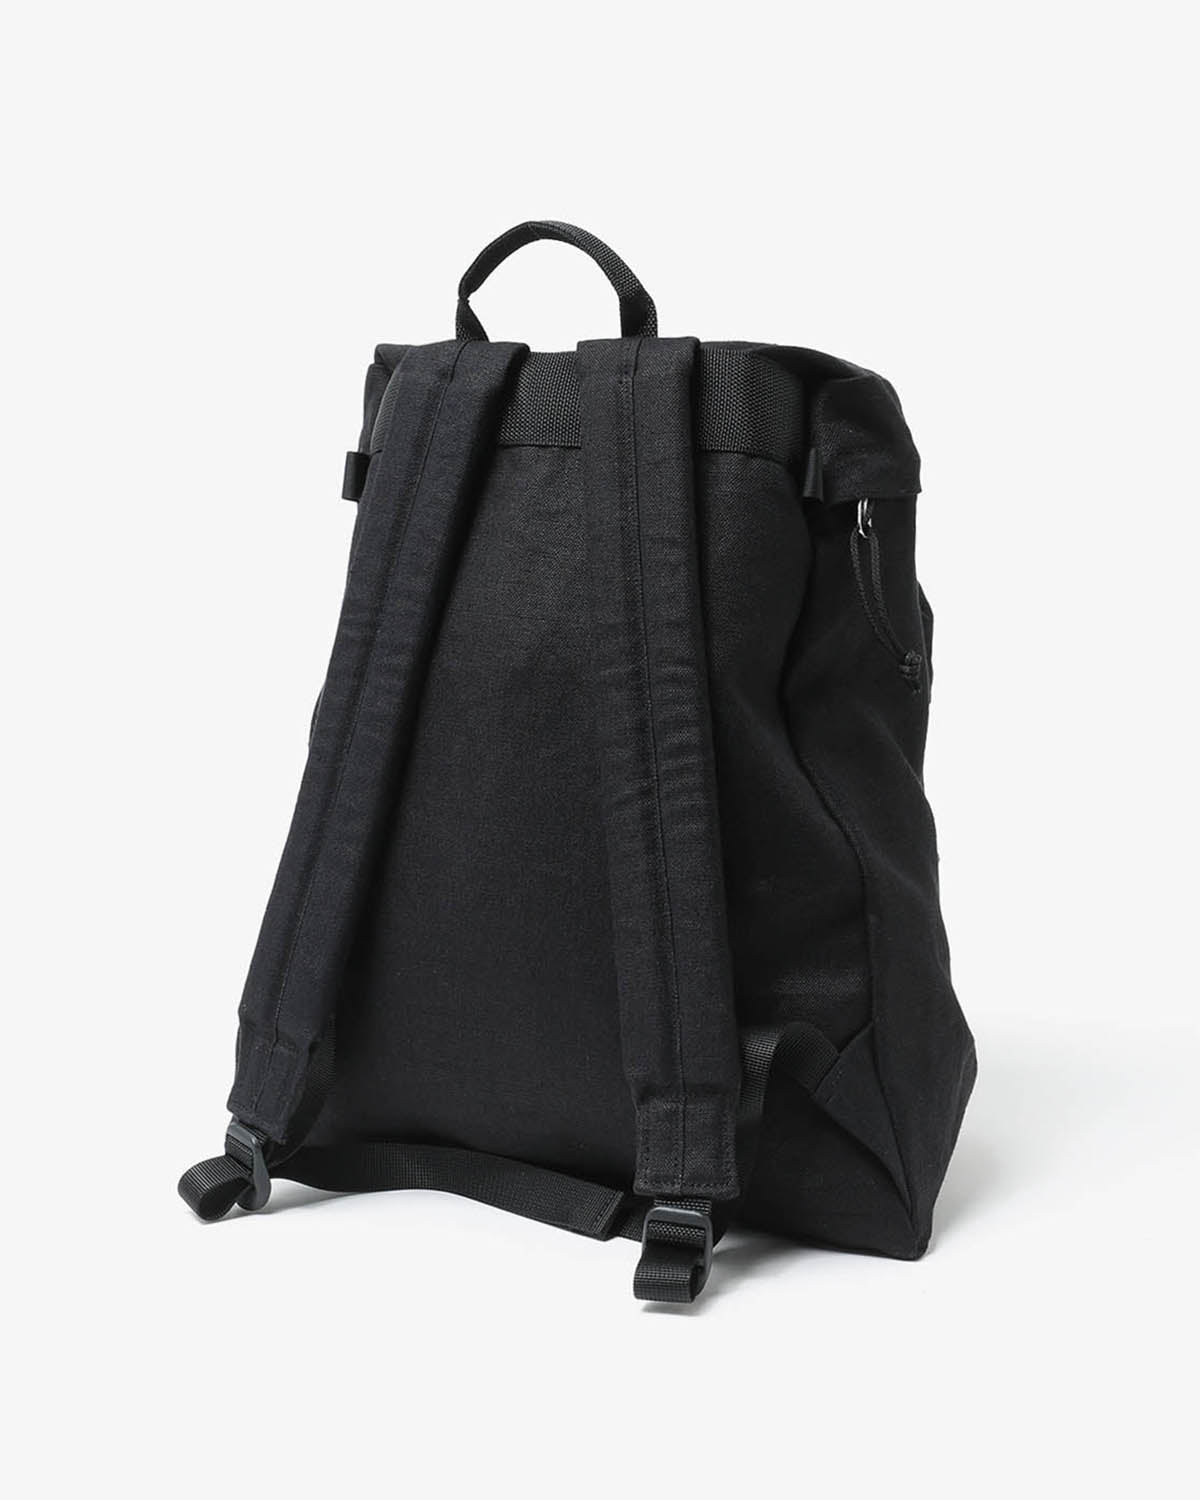 BACKPACK TF : M